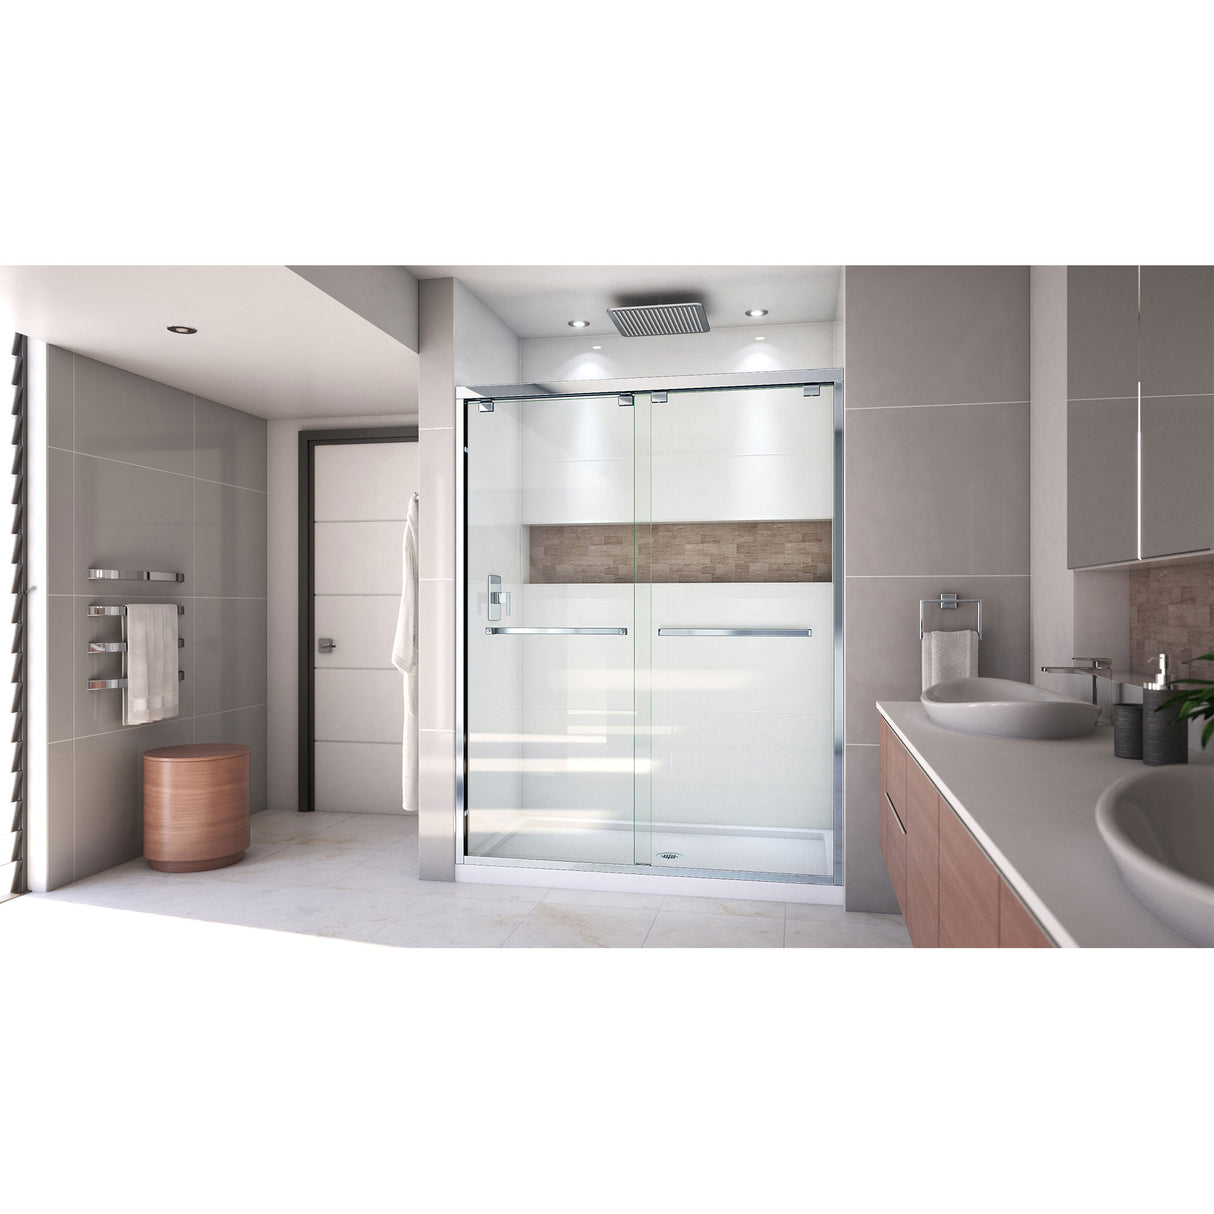 DreamLine Encore 34 in. D x 60 in. W x 78 3/4 in. H Bypass Shower Door in Chrome and Center Drain White Base Kit